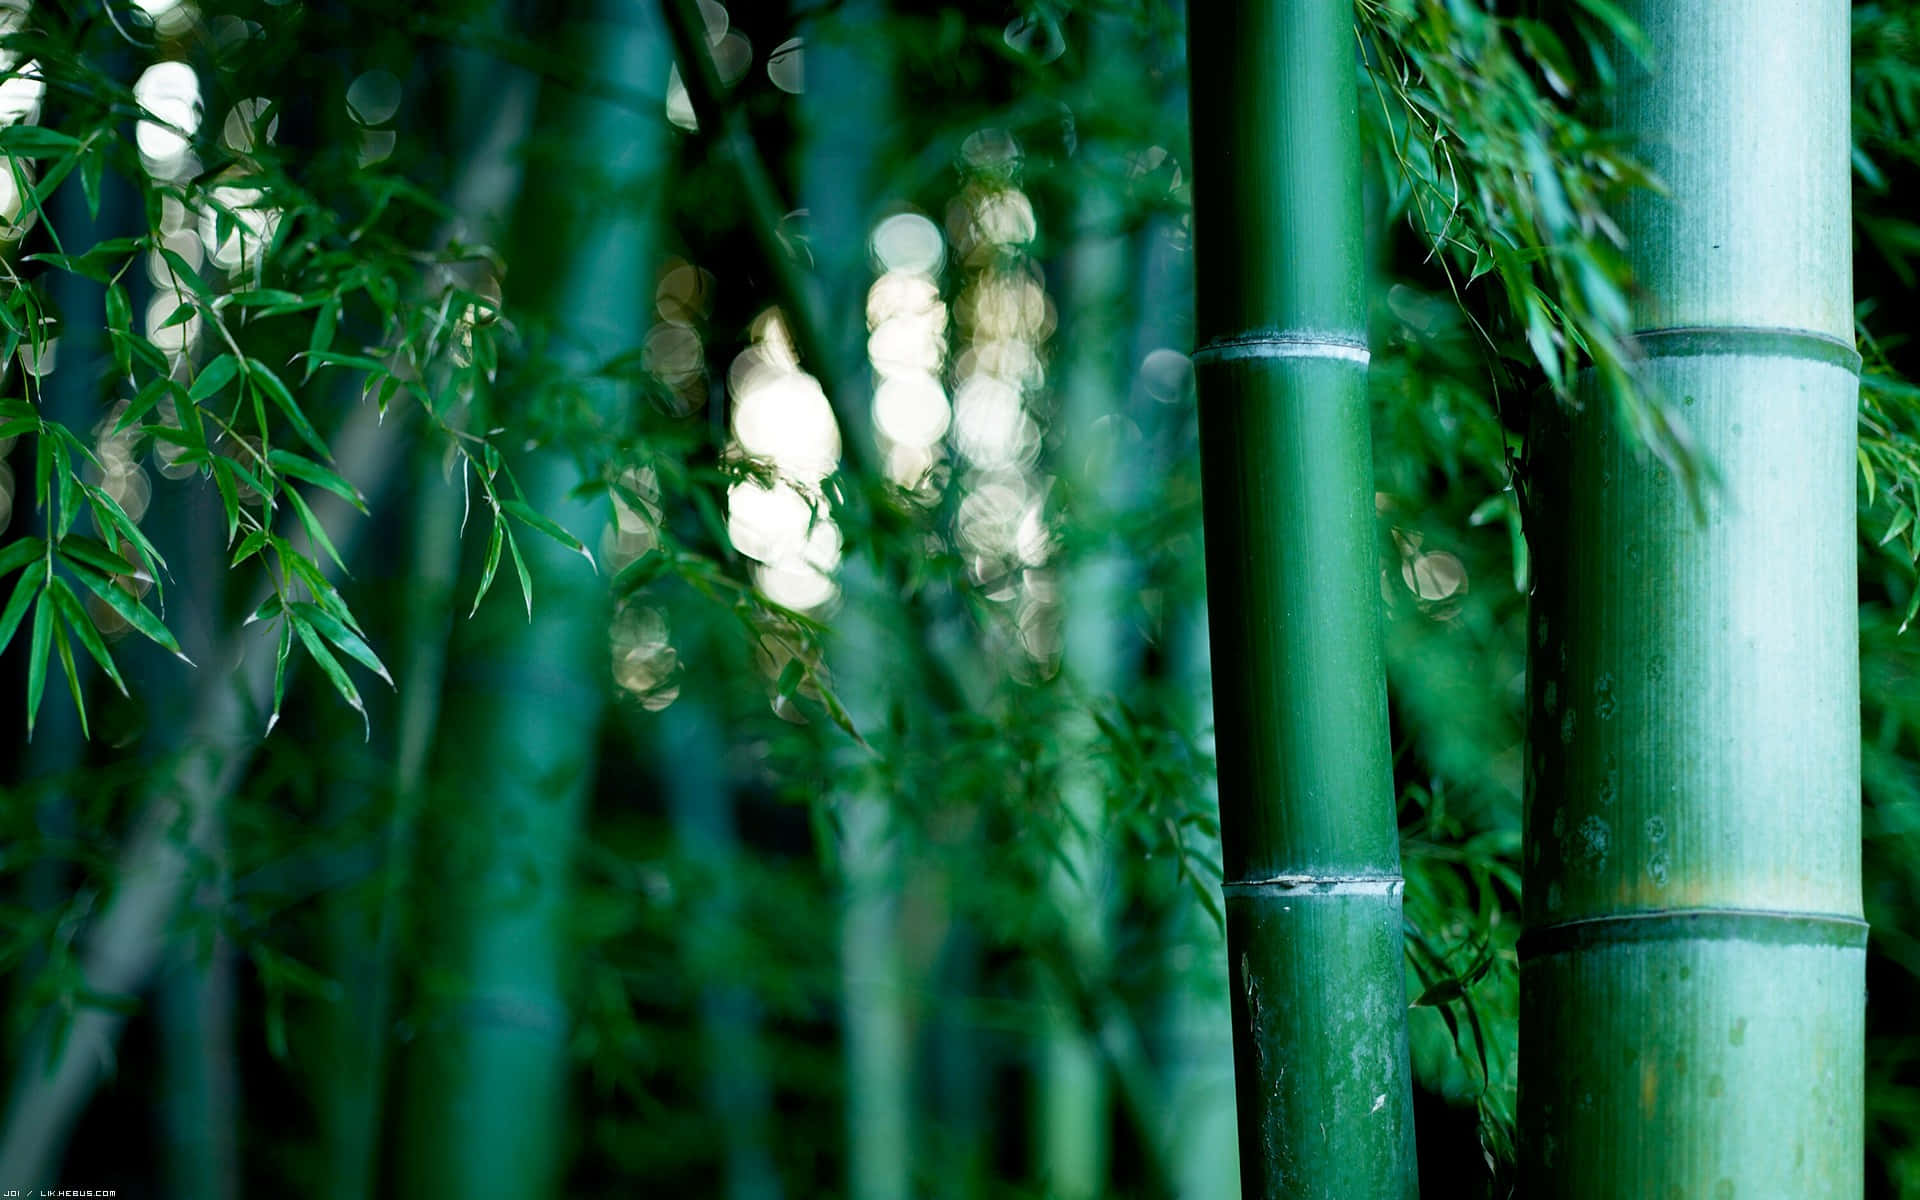 “nature’s Majesty: Take In The Calm And Serenity Of A Bamboo Forest”